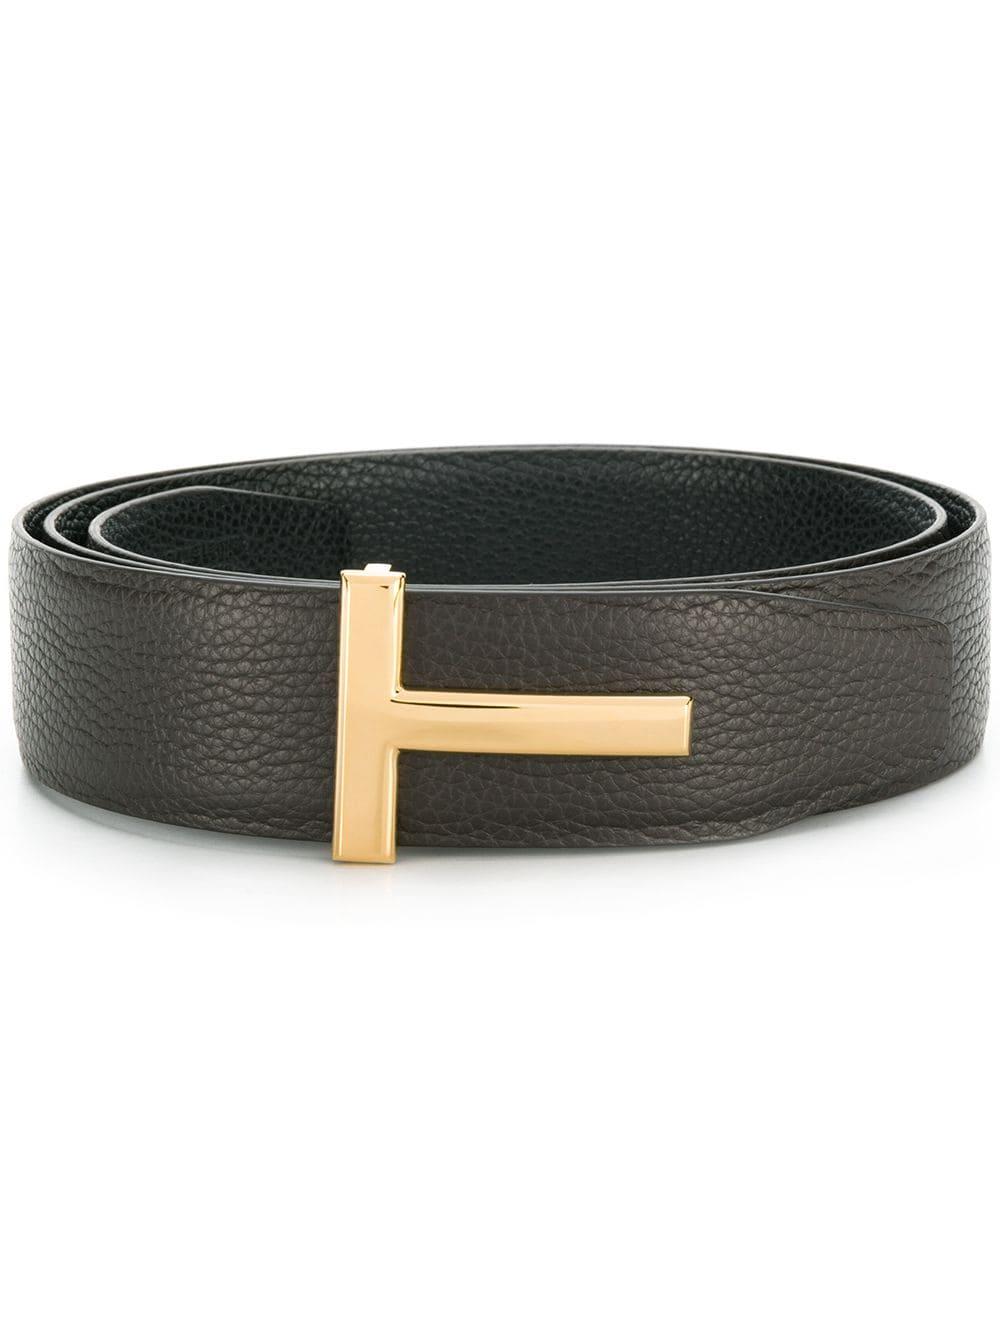 Tom Ford Leather Logo Buckle Belt in Brown for Men - Lyst